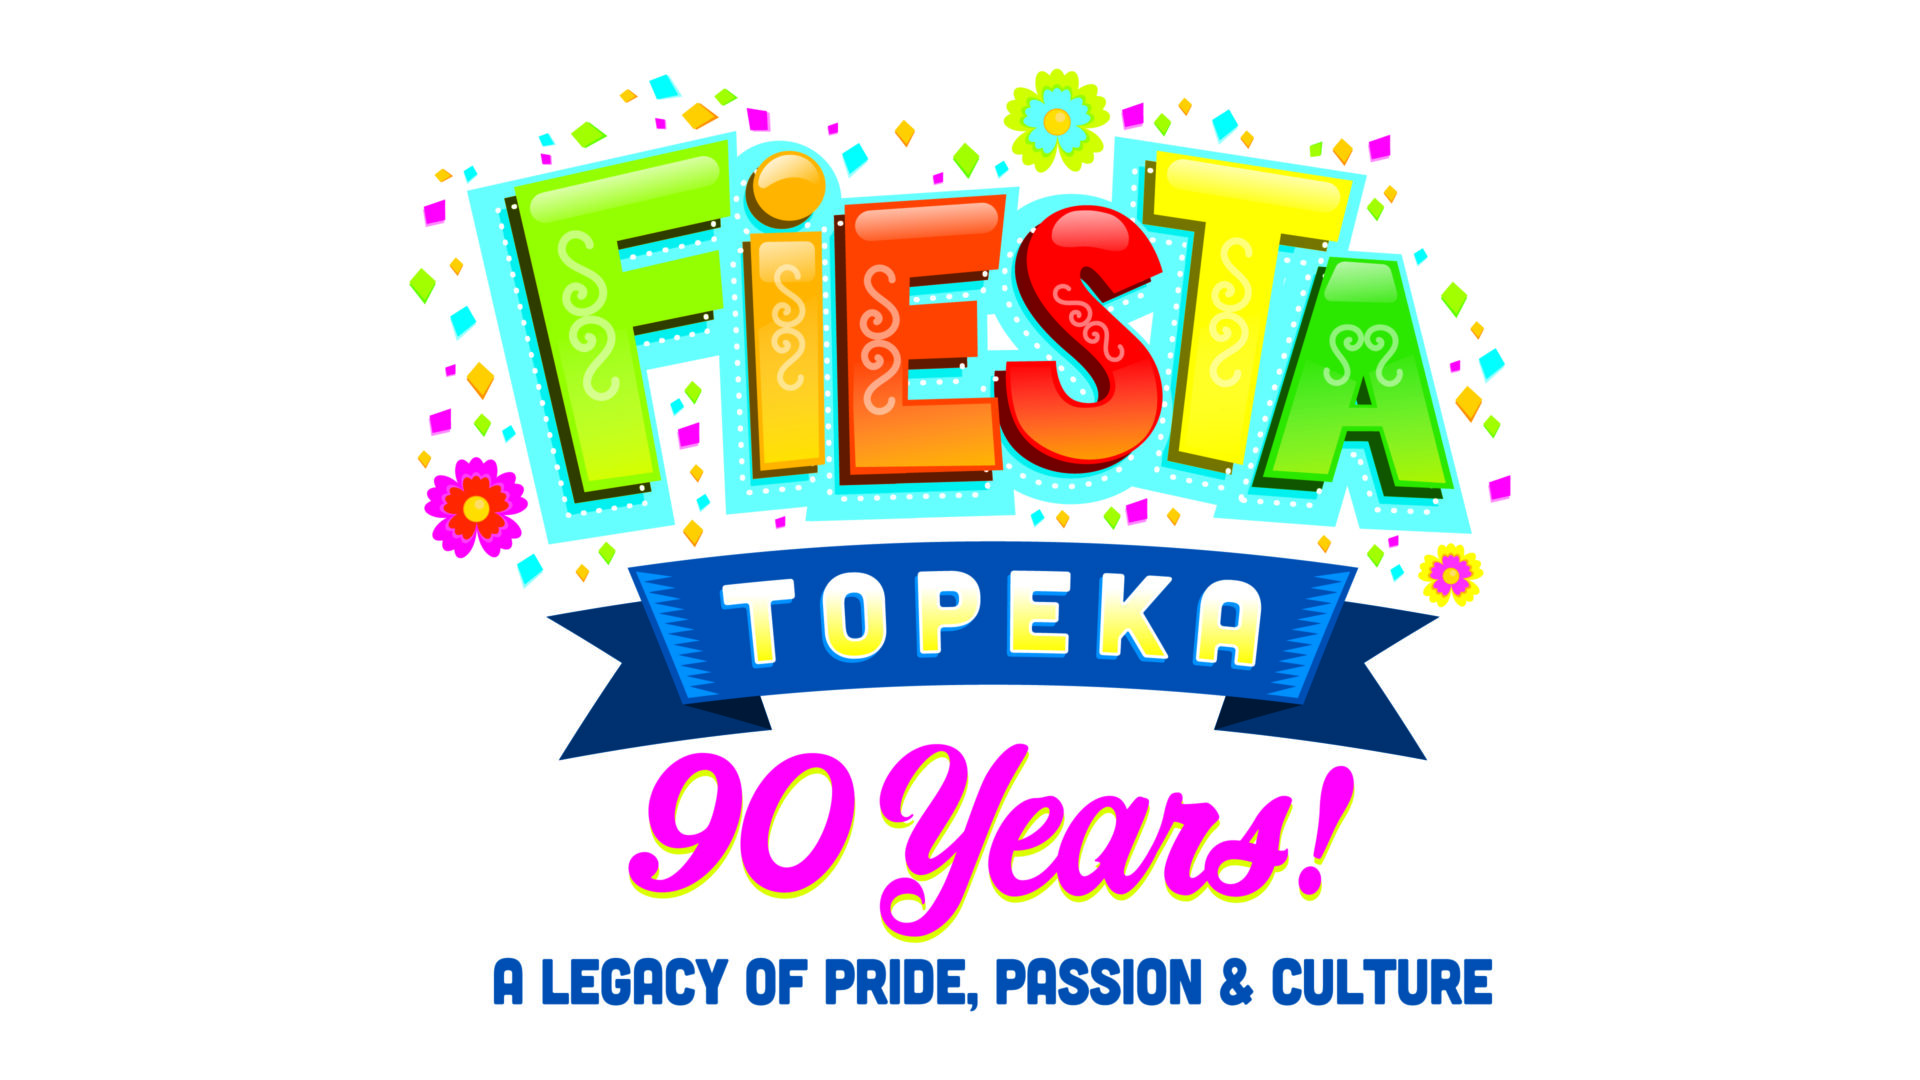 <h1 class="tribe-events-single-event-title">Fiesta Topeka 90 Years!!</h1>